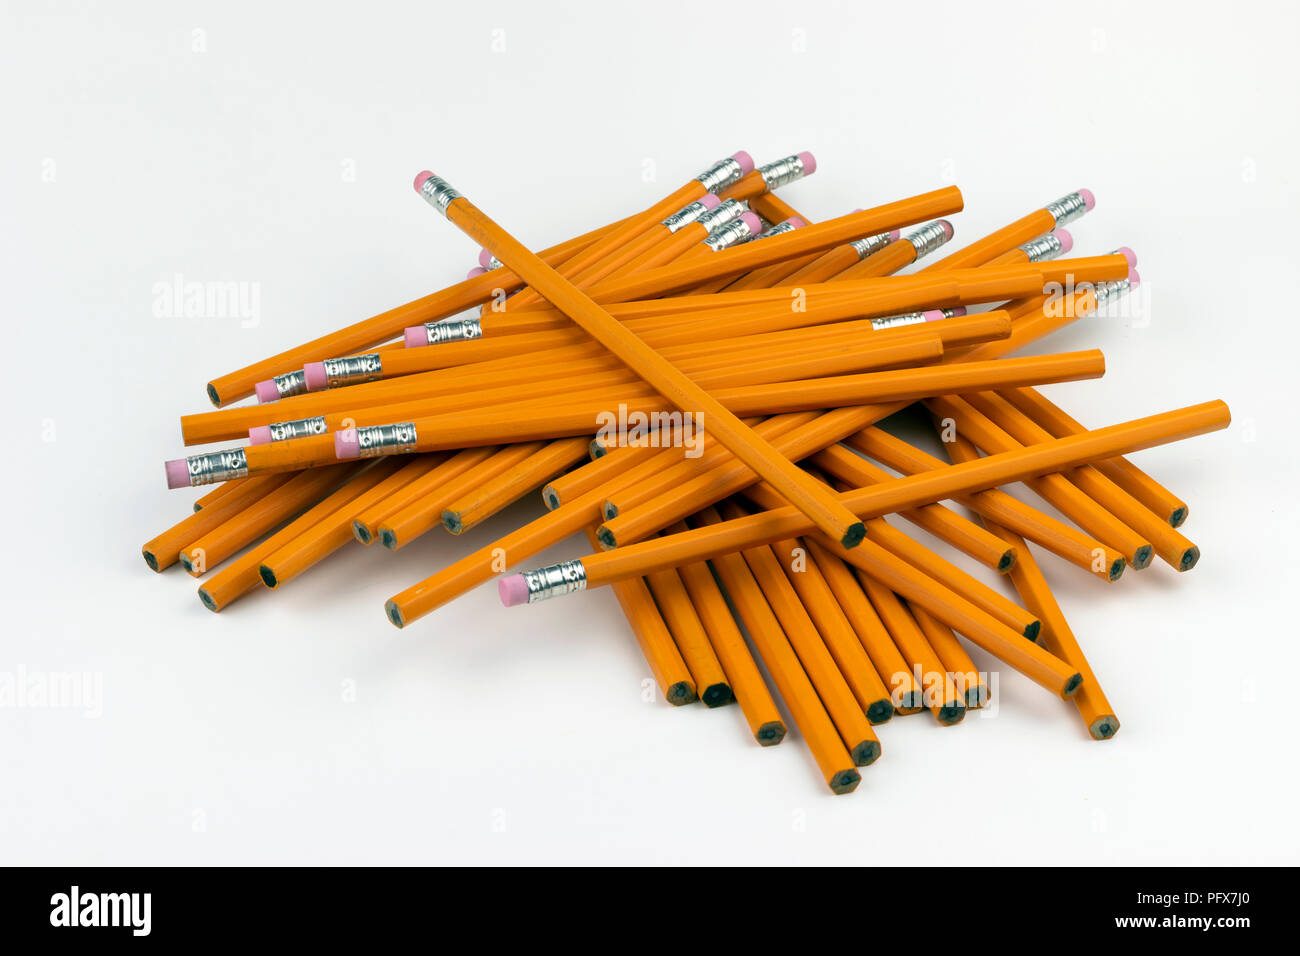 A jumbled, disorganized stack of unsharpened, orange, six-sided pencils ready to be sharpened for writing at school or in an office. Stock Photo